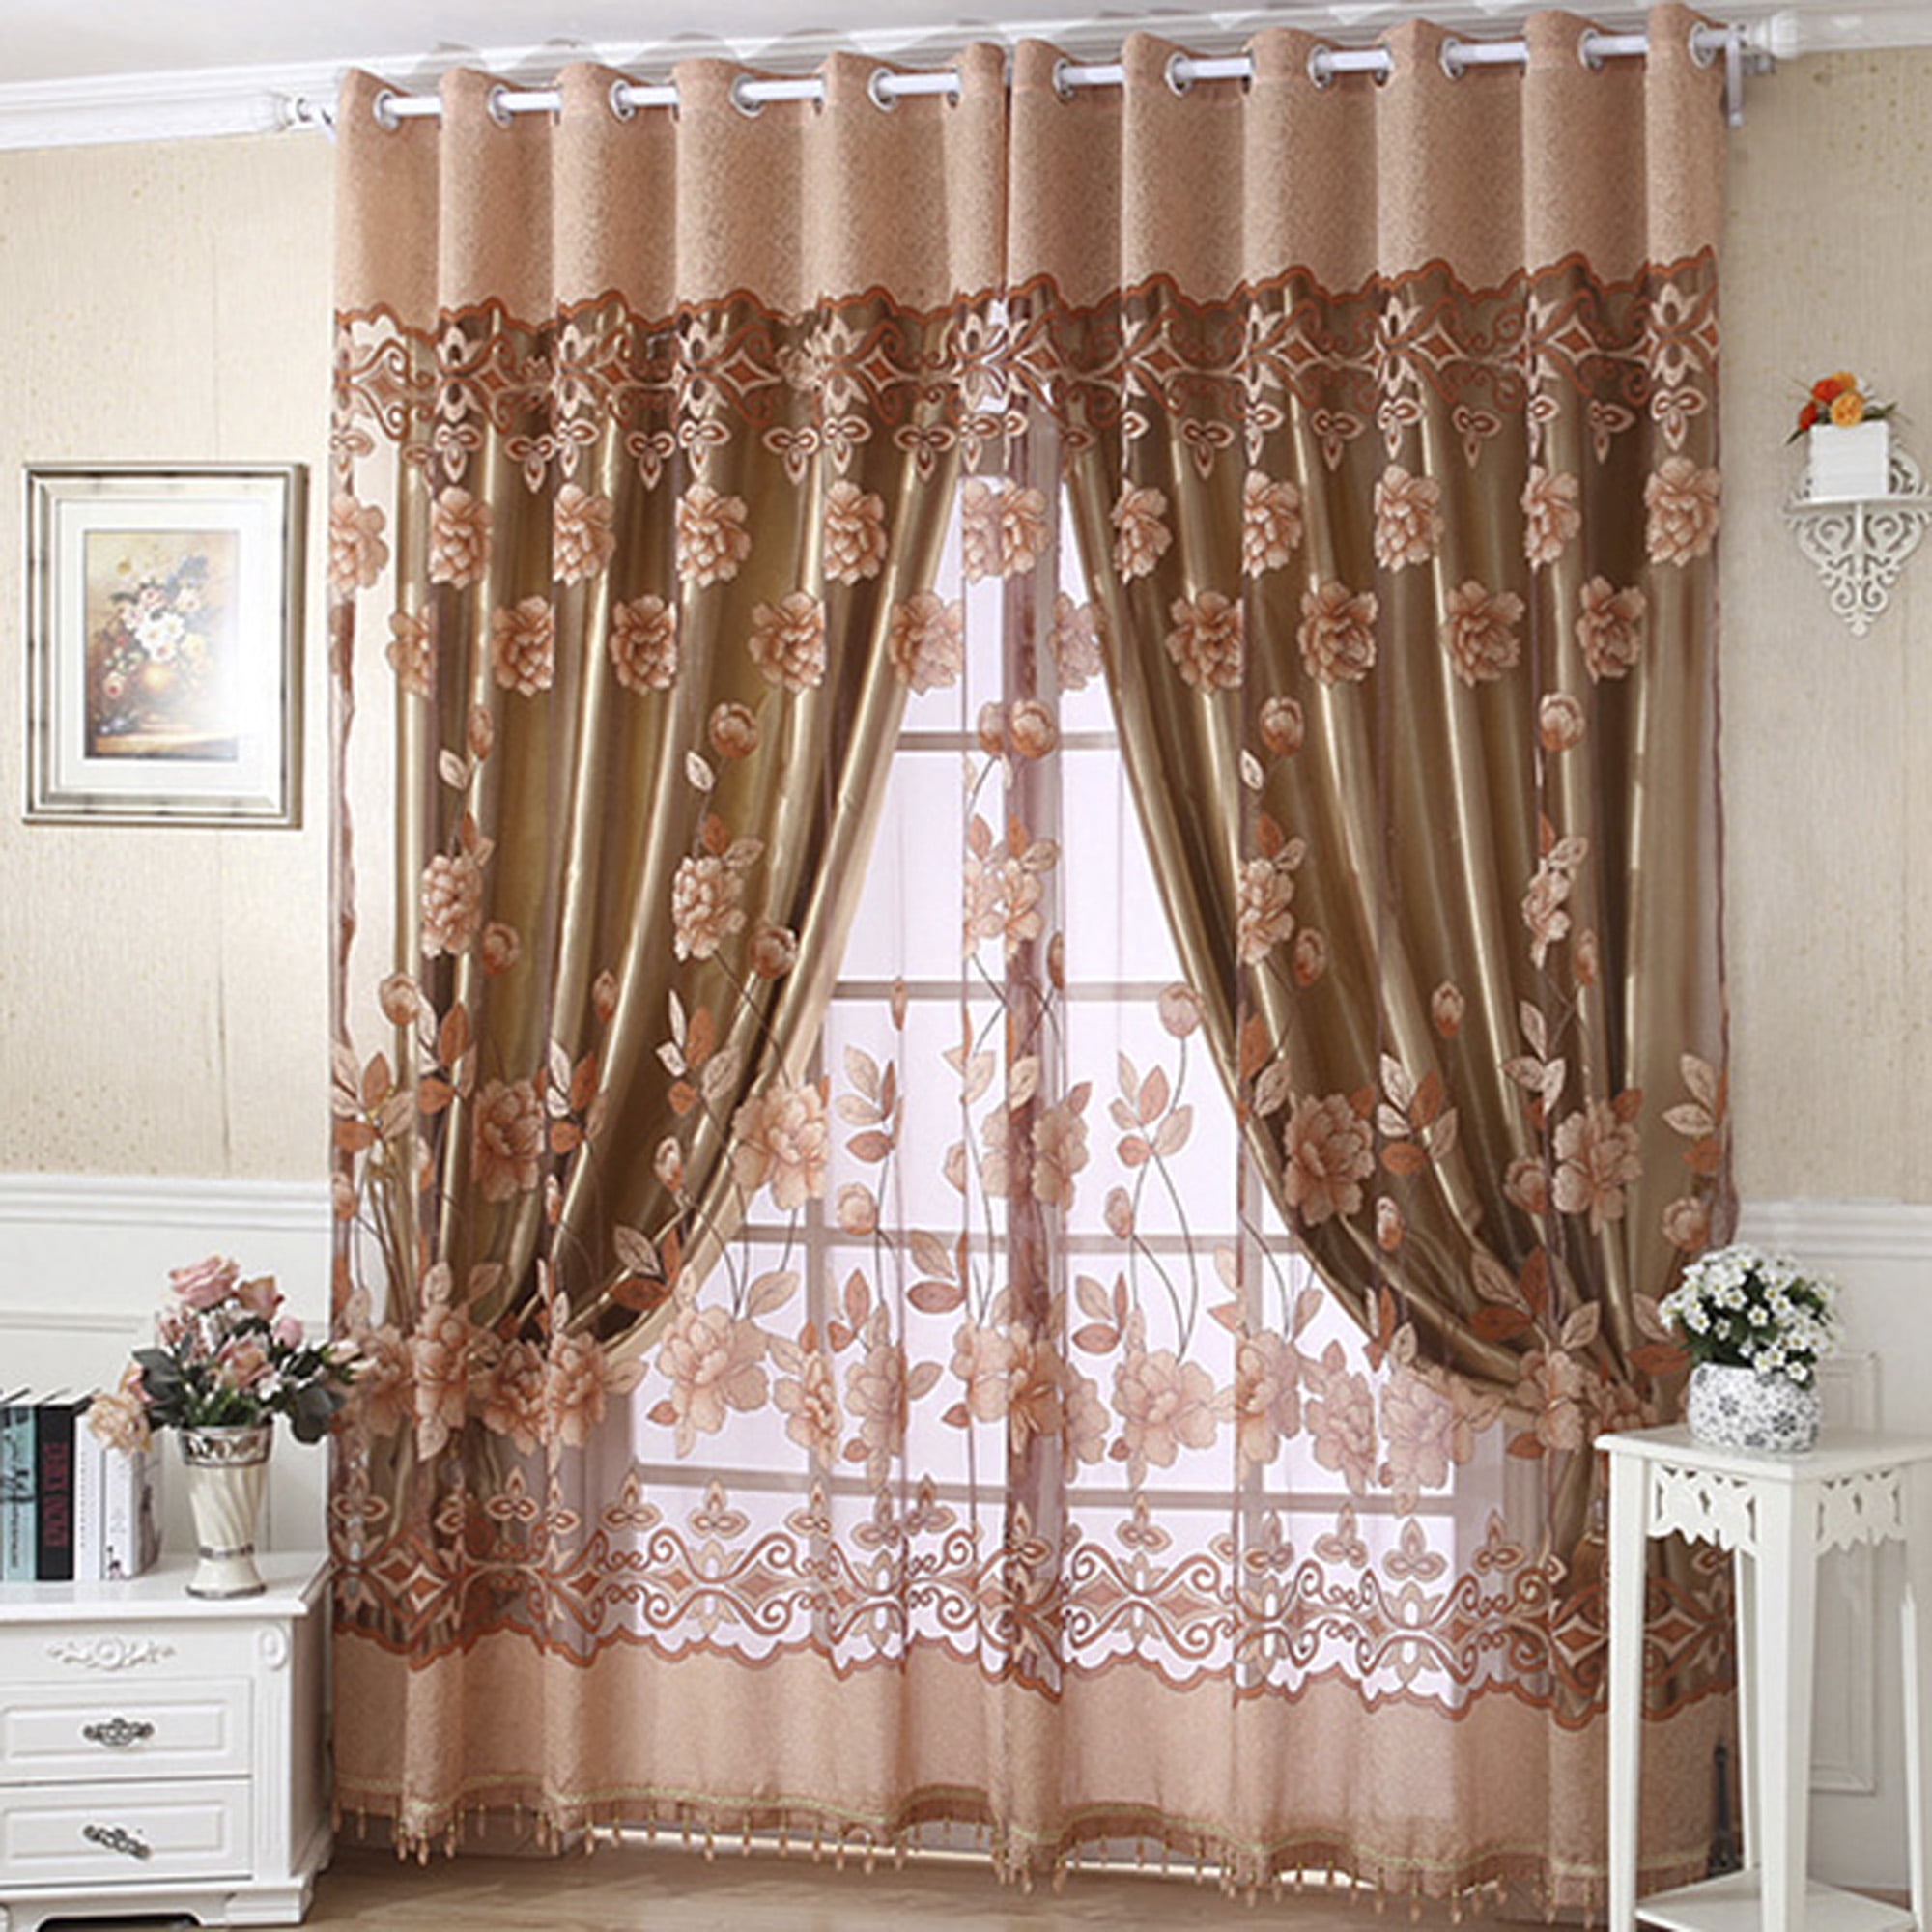 Willow Panel Sheer Voile Window Curtains Drape Door Divider Yarn Tulle Decor FW 